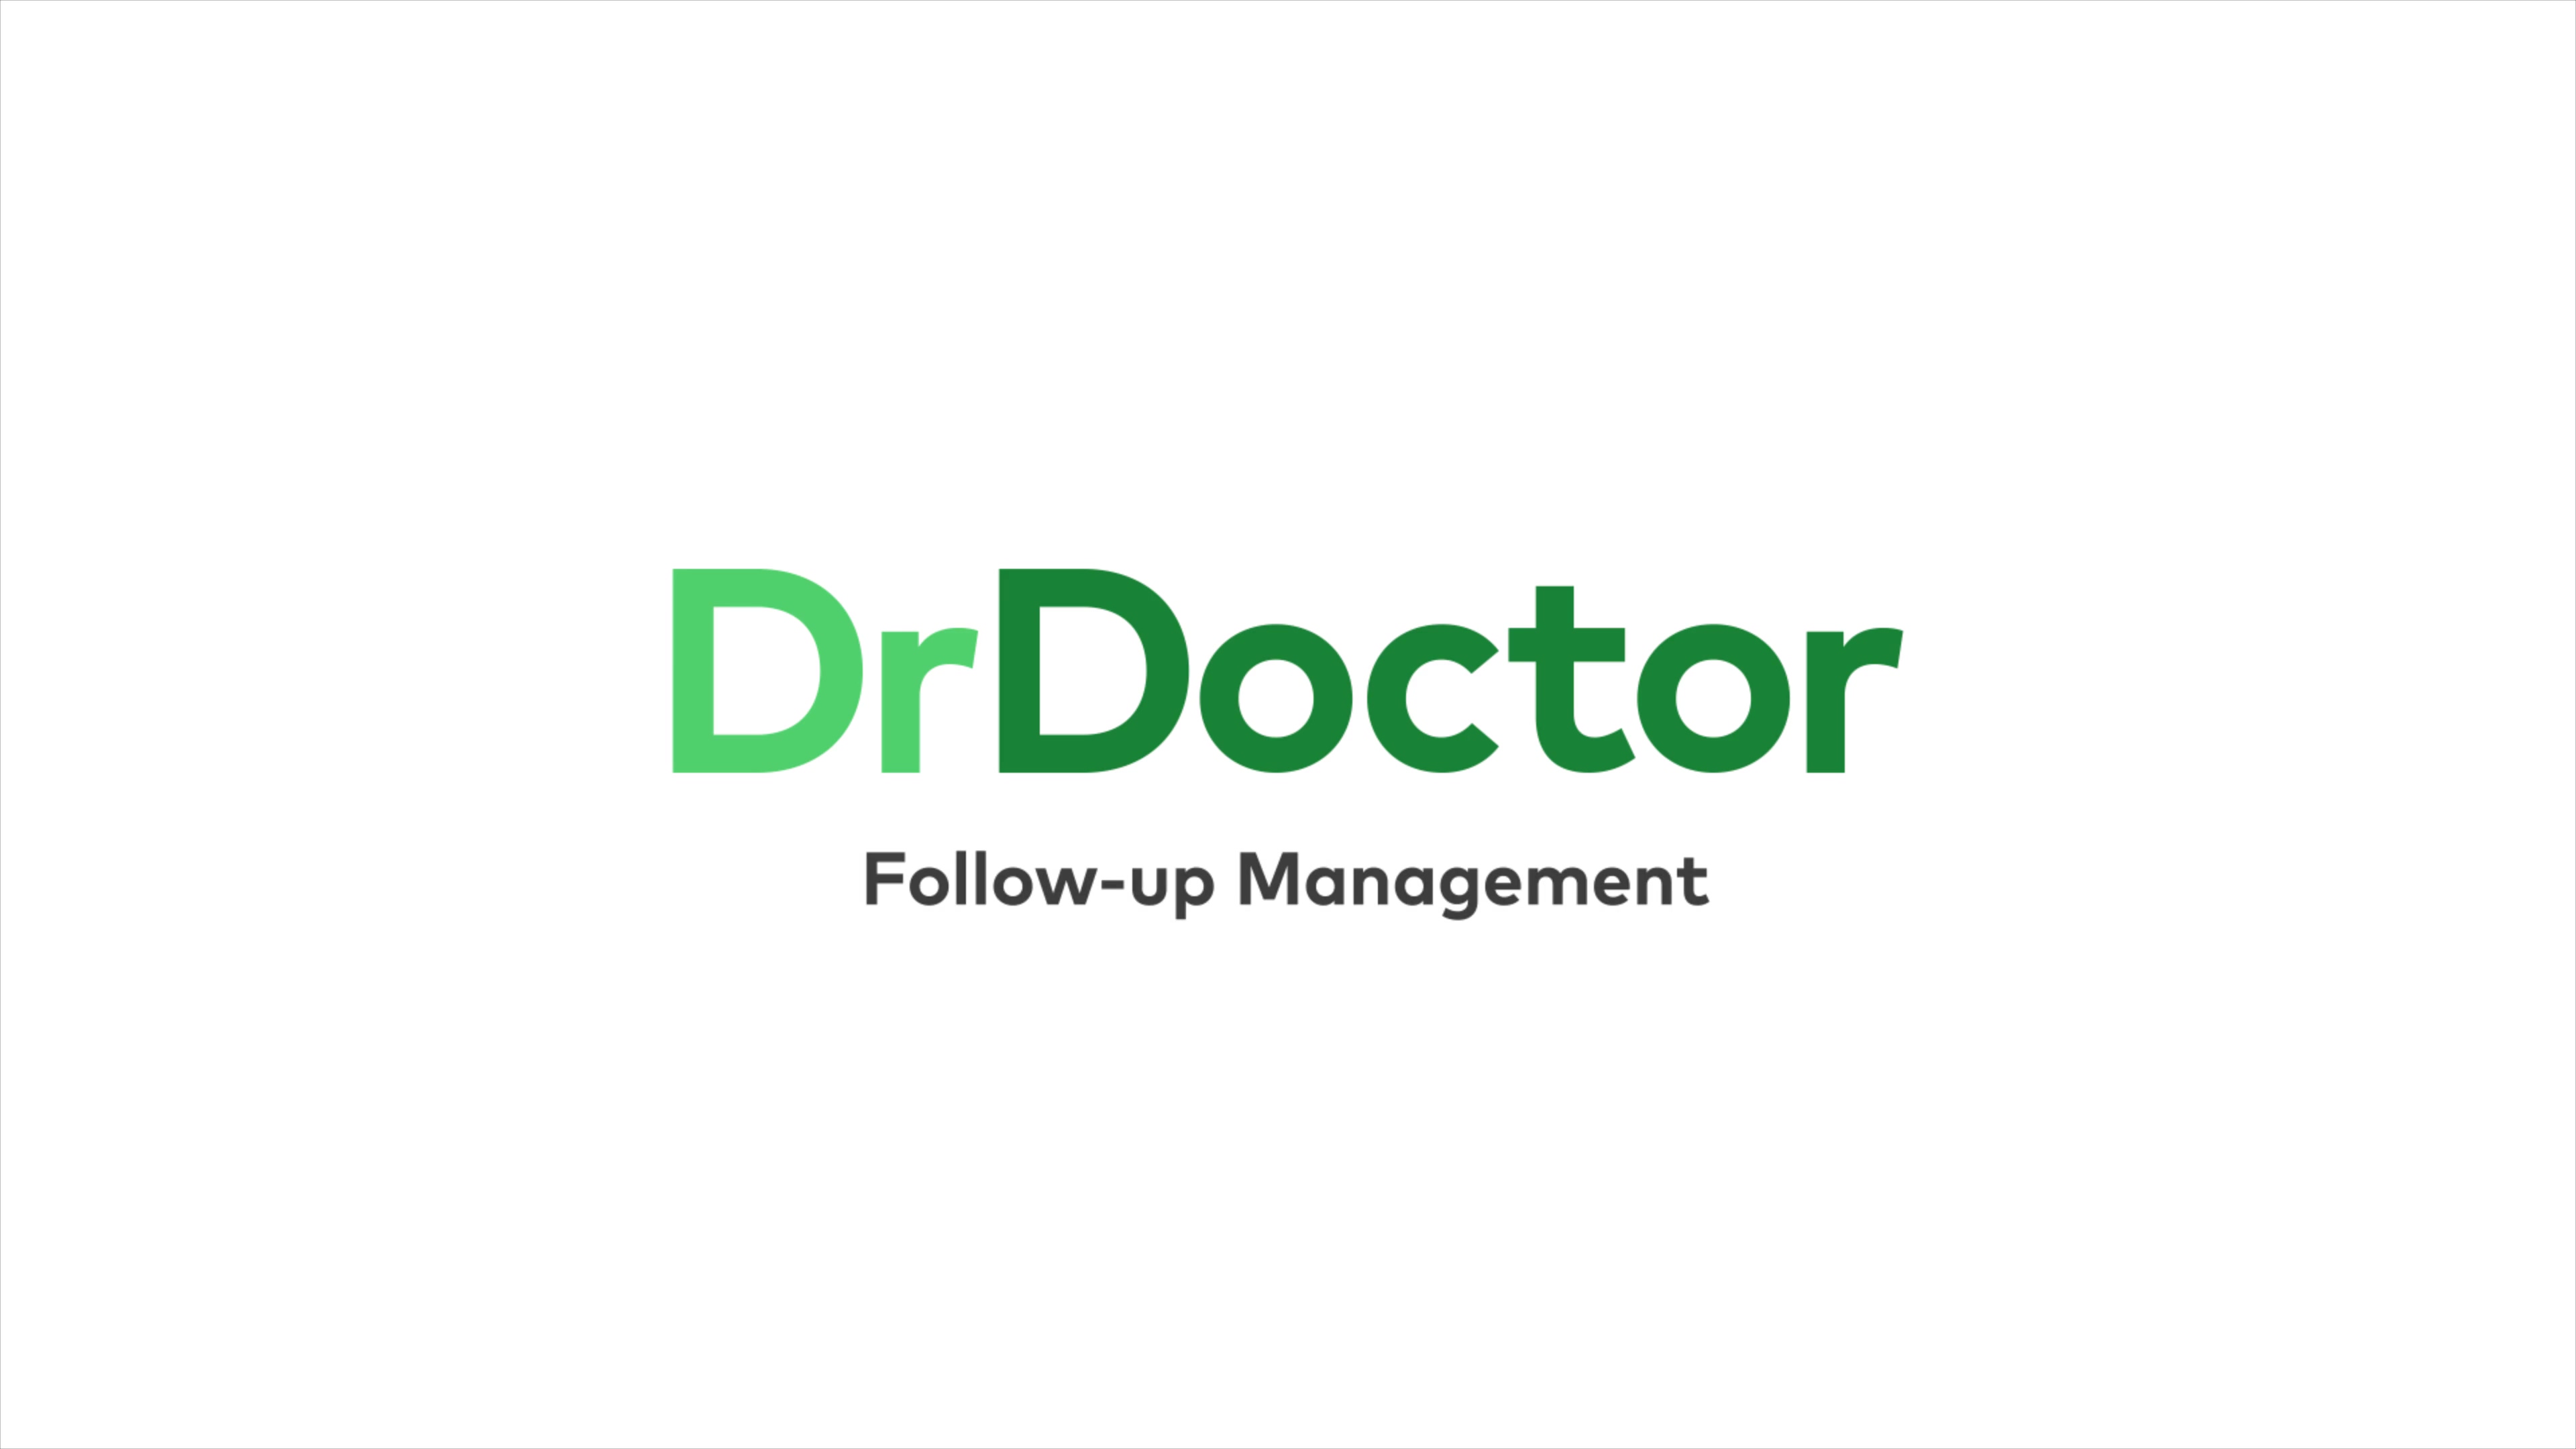 Follow-up Management by DrDoctor